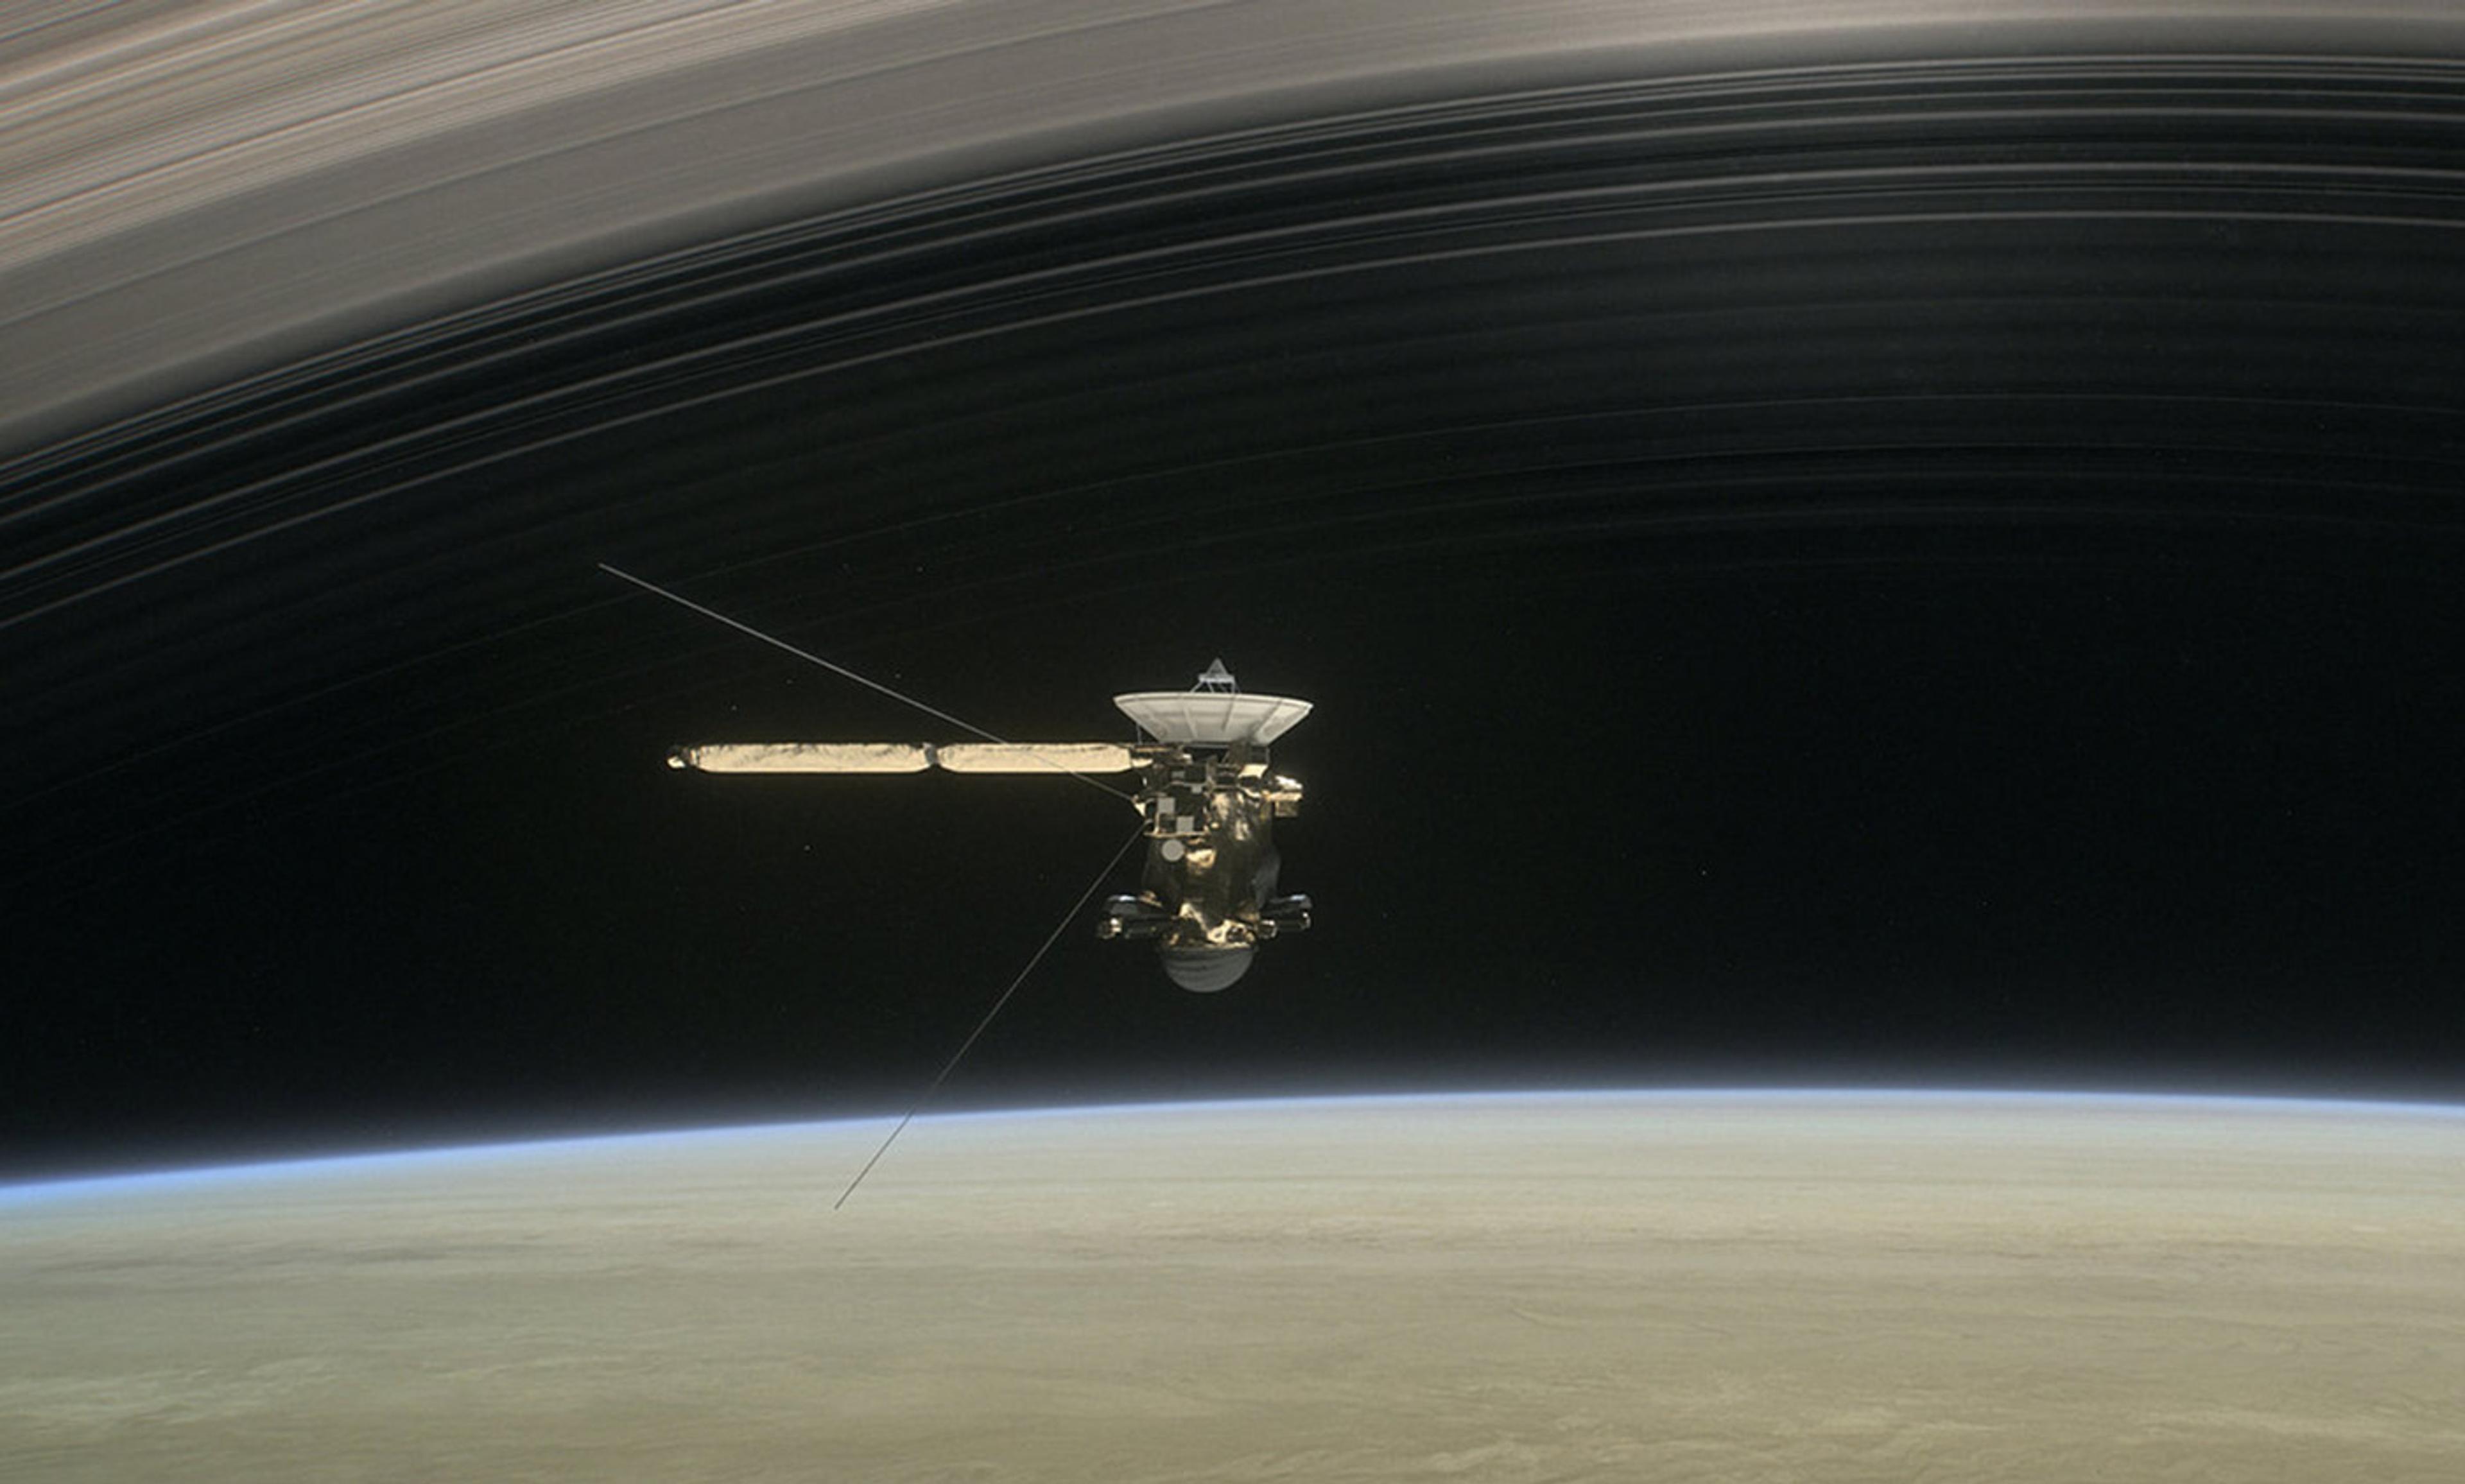 <p>The Cassini mission was a direct consequence of Einstein’s thought experiments. <em>Photo JPL/NASA</em></p>